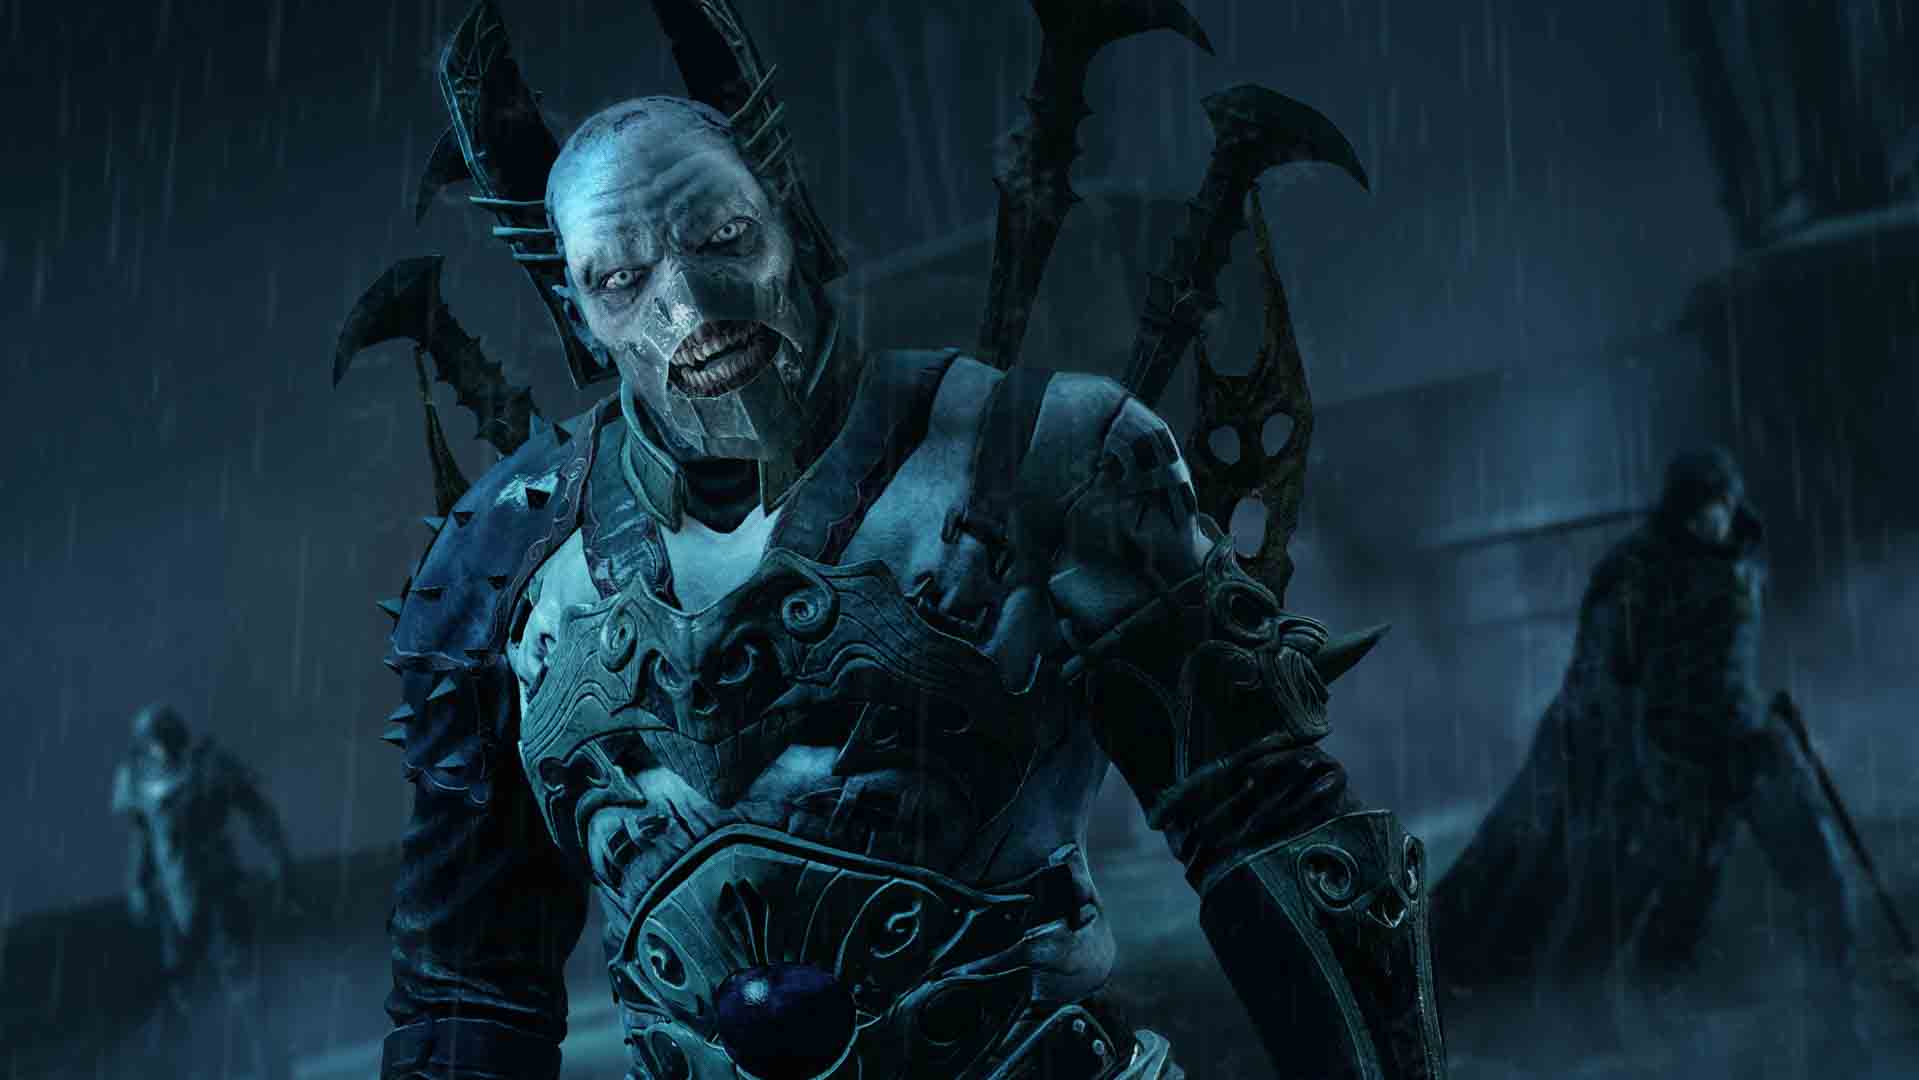 middle-earth-shadow-of-mordor-achievements-and-screenshots-revealed-godisageek